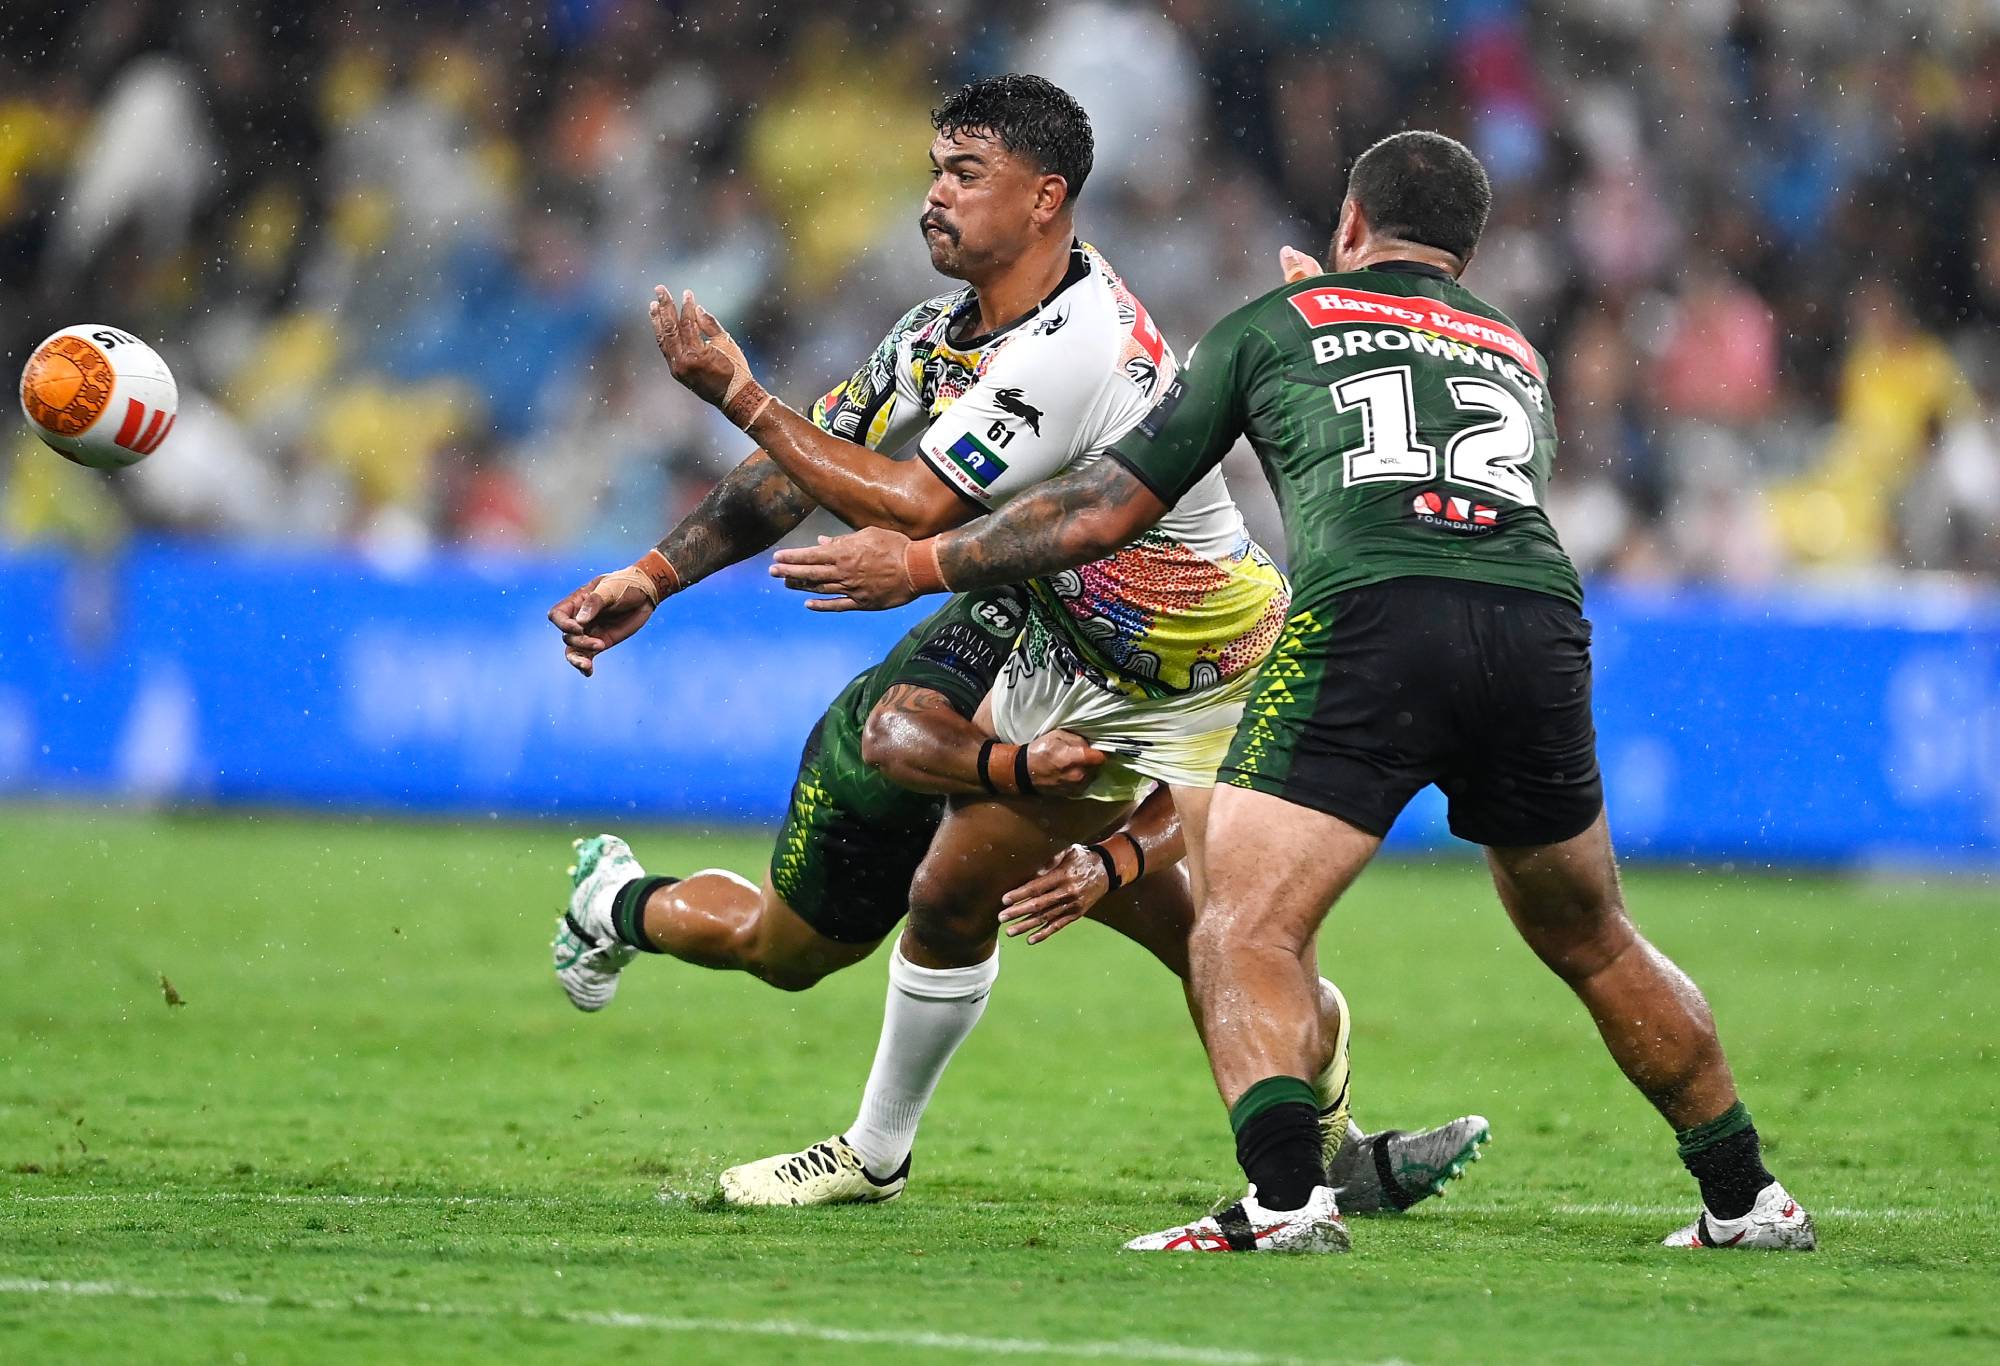 TOWNSVILLE, AUSTRALIA - FEBRUARY 16: Latrell Mitchell of the Indigenous All-Stars passes as he is tackled during the NRL All-Stars match between Men's Australia Indigenous All Stars and Aotearoa NZ Men's Maori Tane at Queensland Country Bank Stadium on February 16, 2024 in Townsville, Australia. (Photo by Ian Hitchcock/Getty Images)